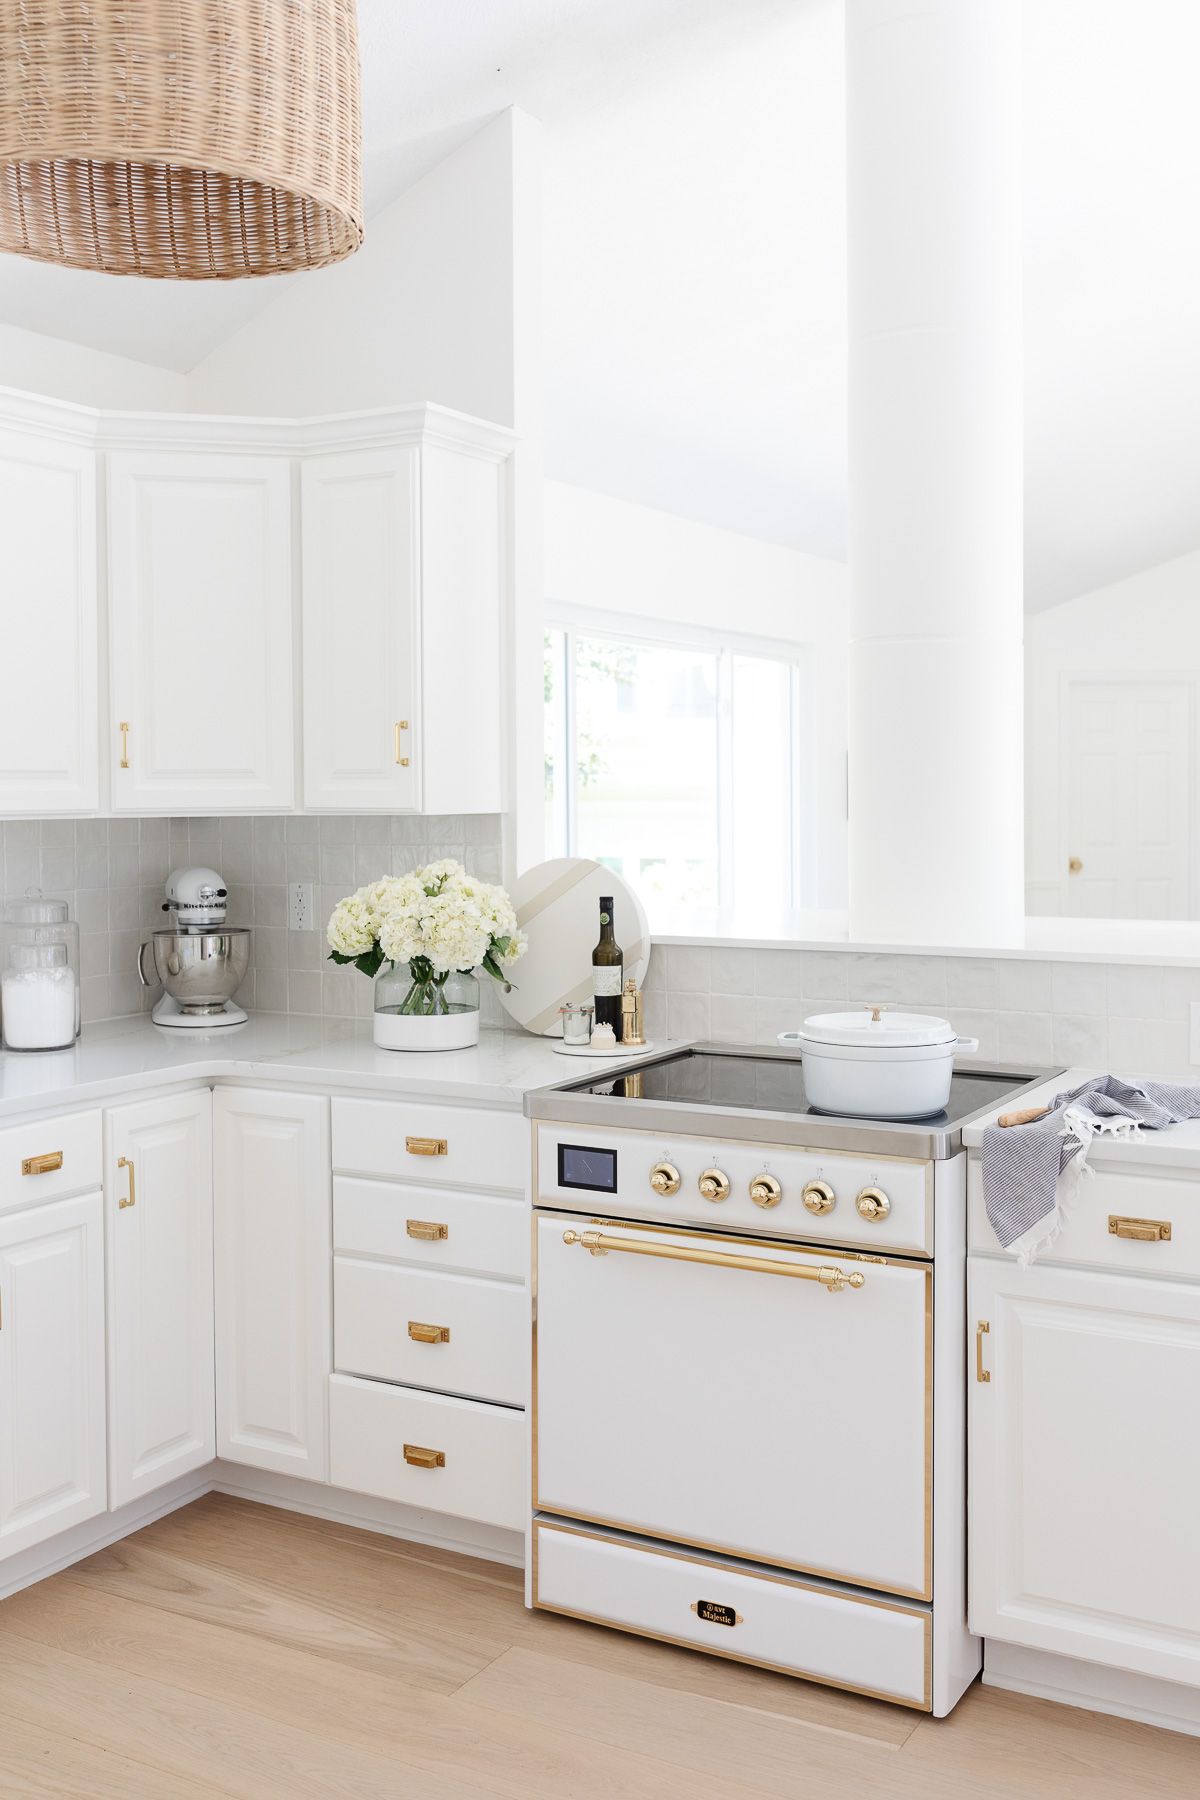 A white kitchen with unlacquered brass hardware.